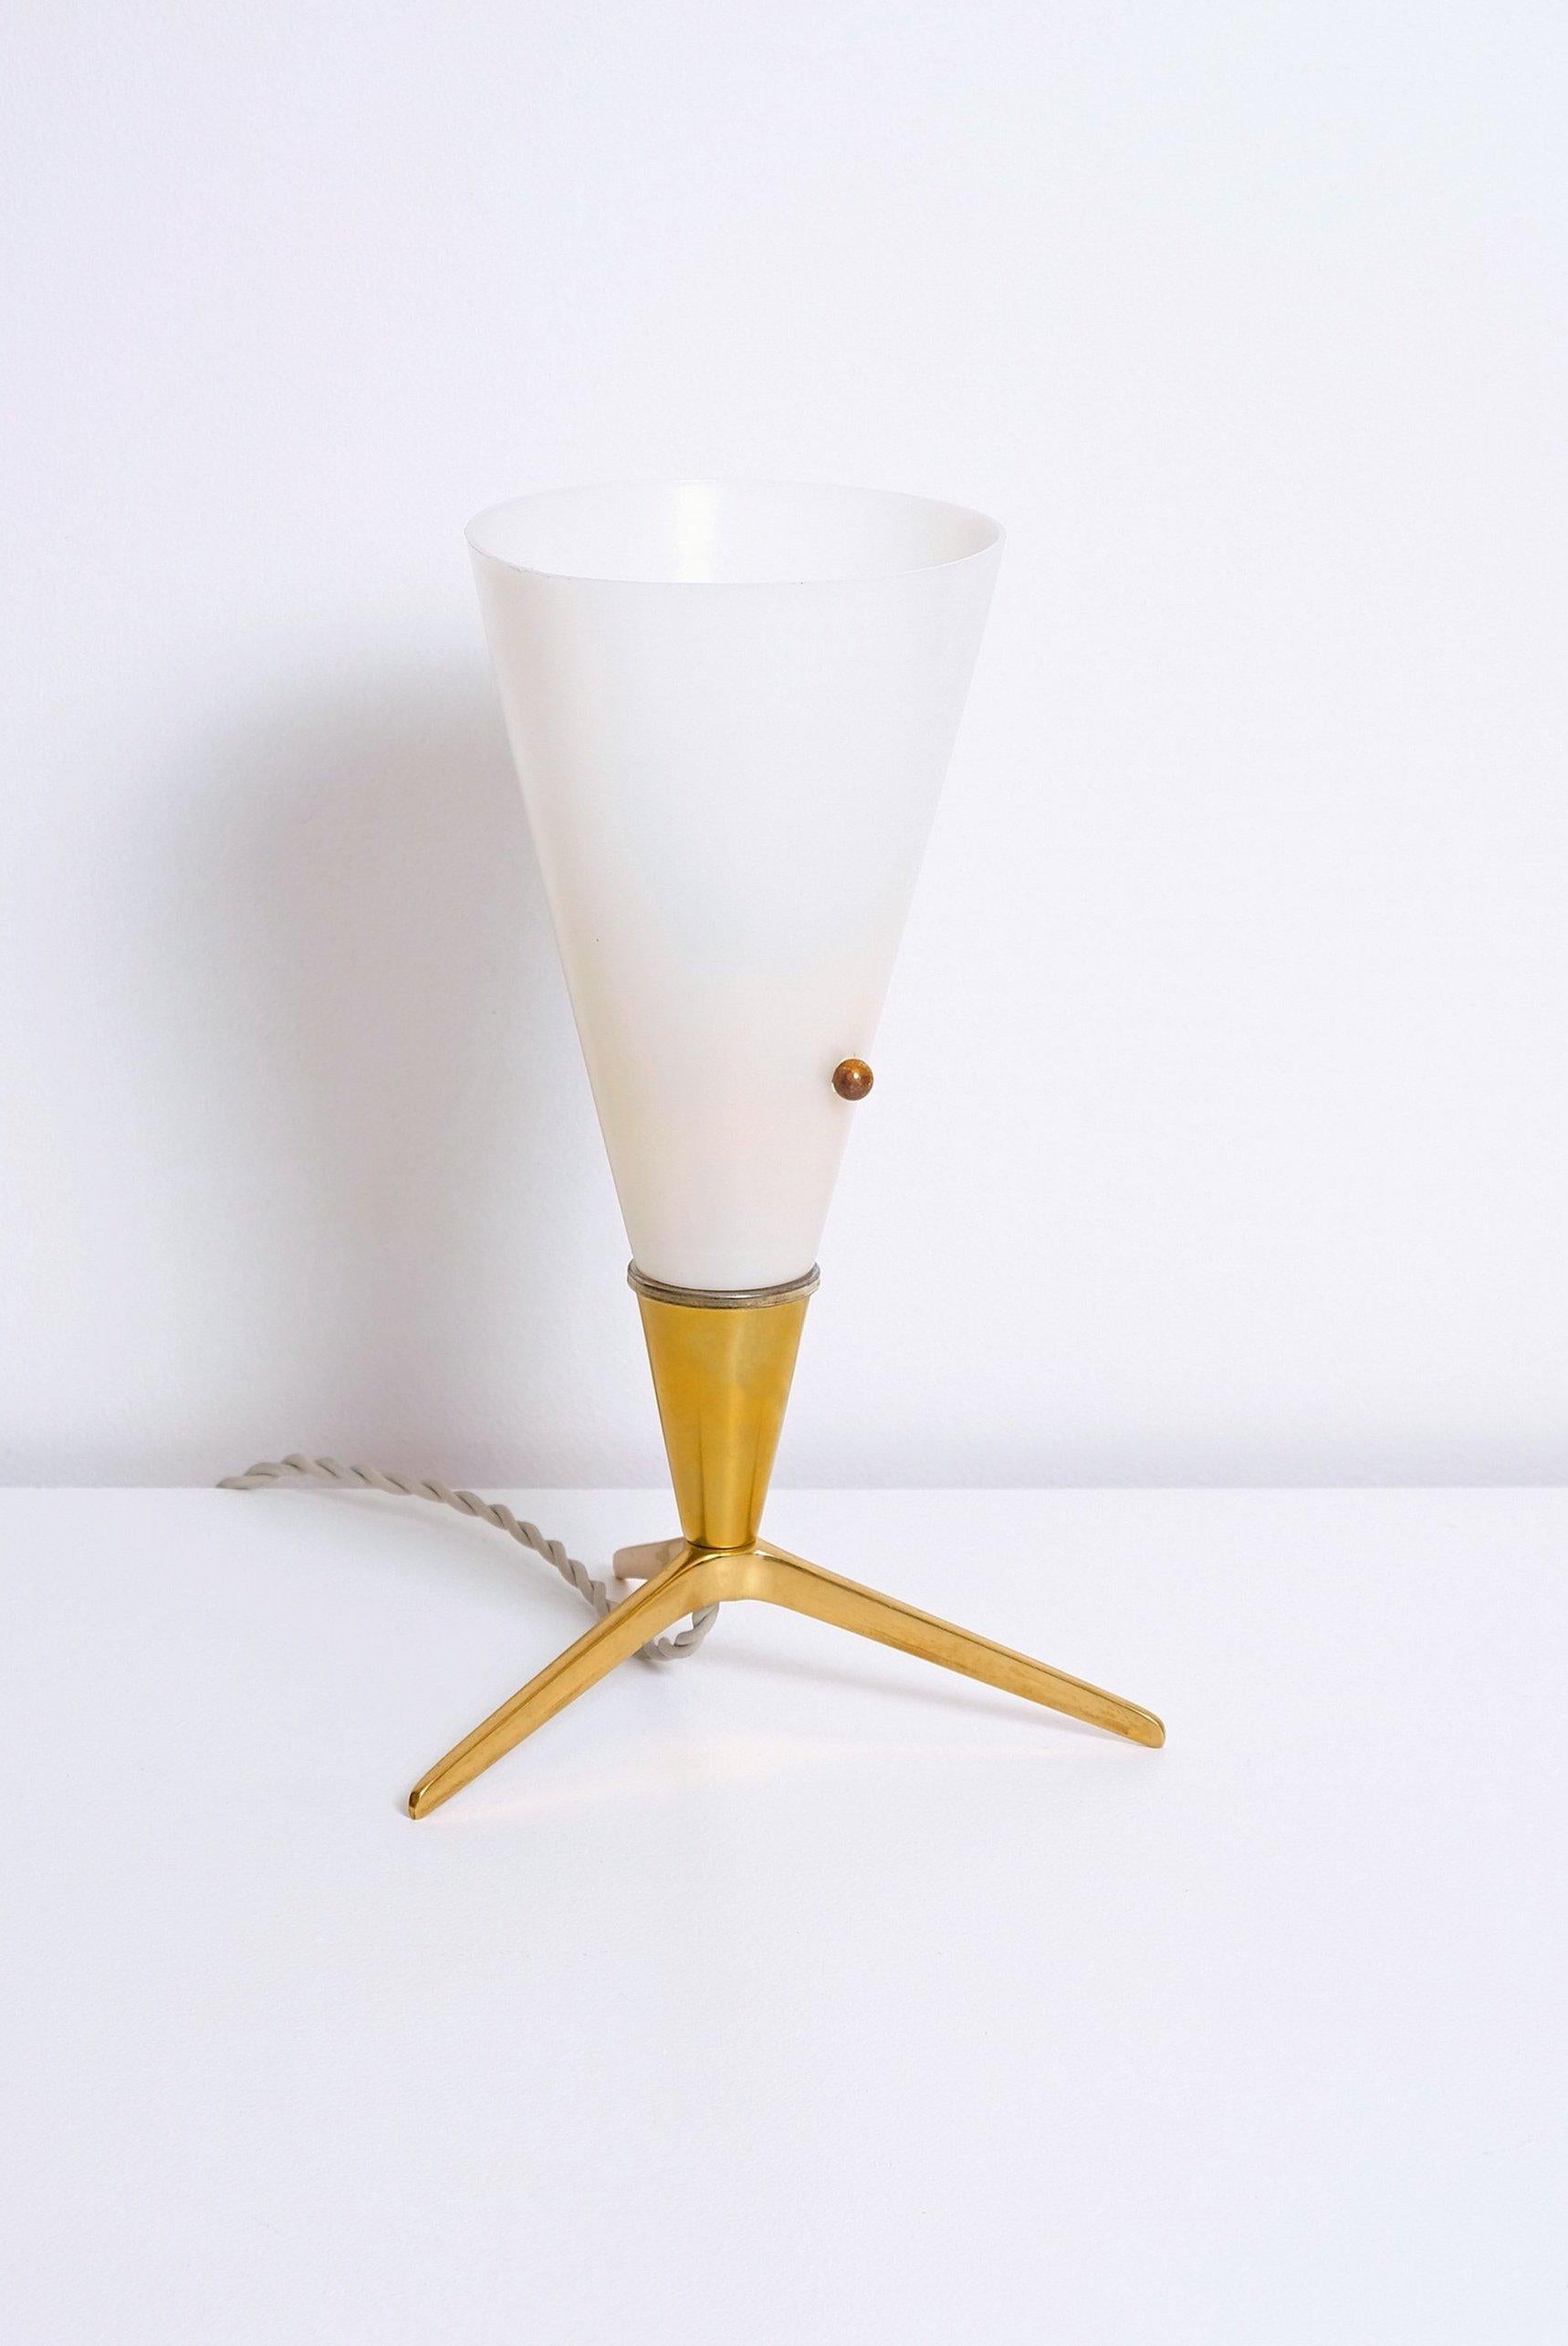 Torch light desk lamp made in France. Polished brass base, perspex cone shade. 40 watts E-26 Edison medium base incandescent bulb recommended or higher if LED/CFL.
Rewired with E-26 turn key socket , new braided cord. Minor tarnish, dings, scuffs,